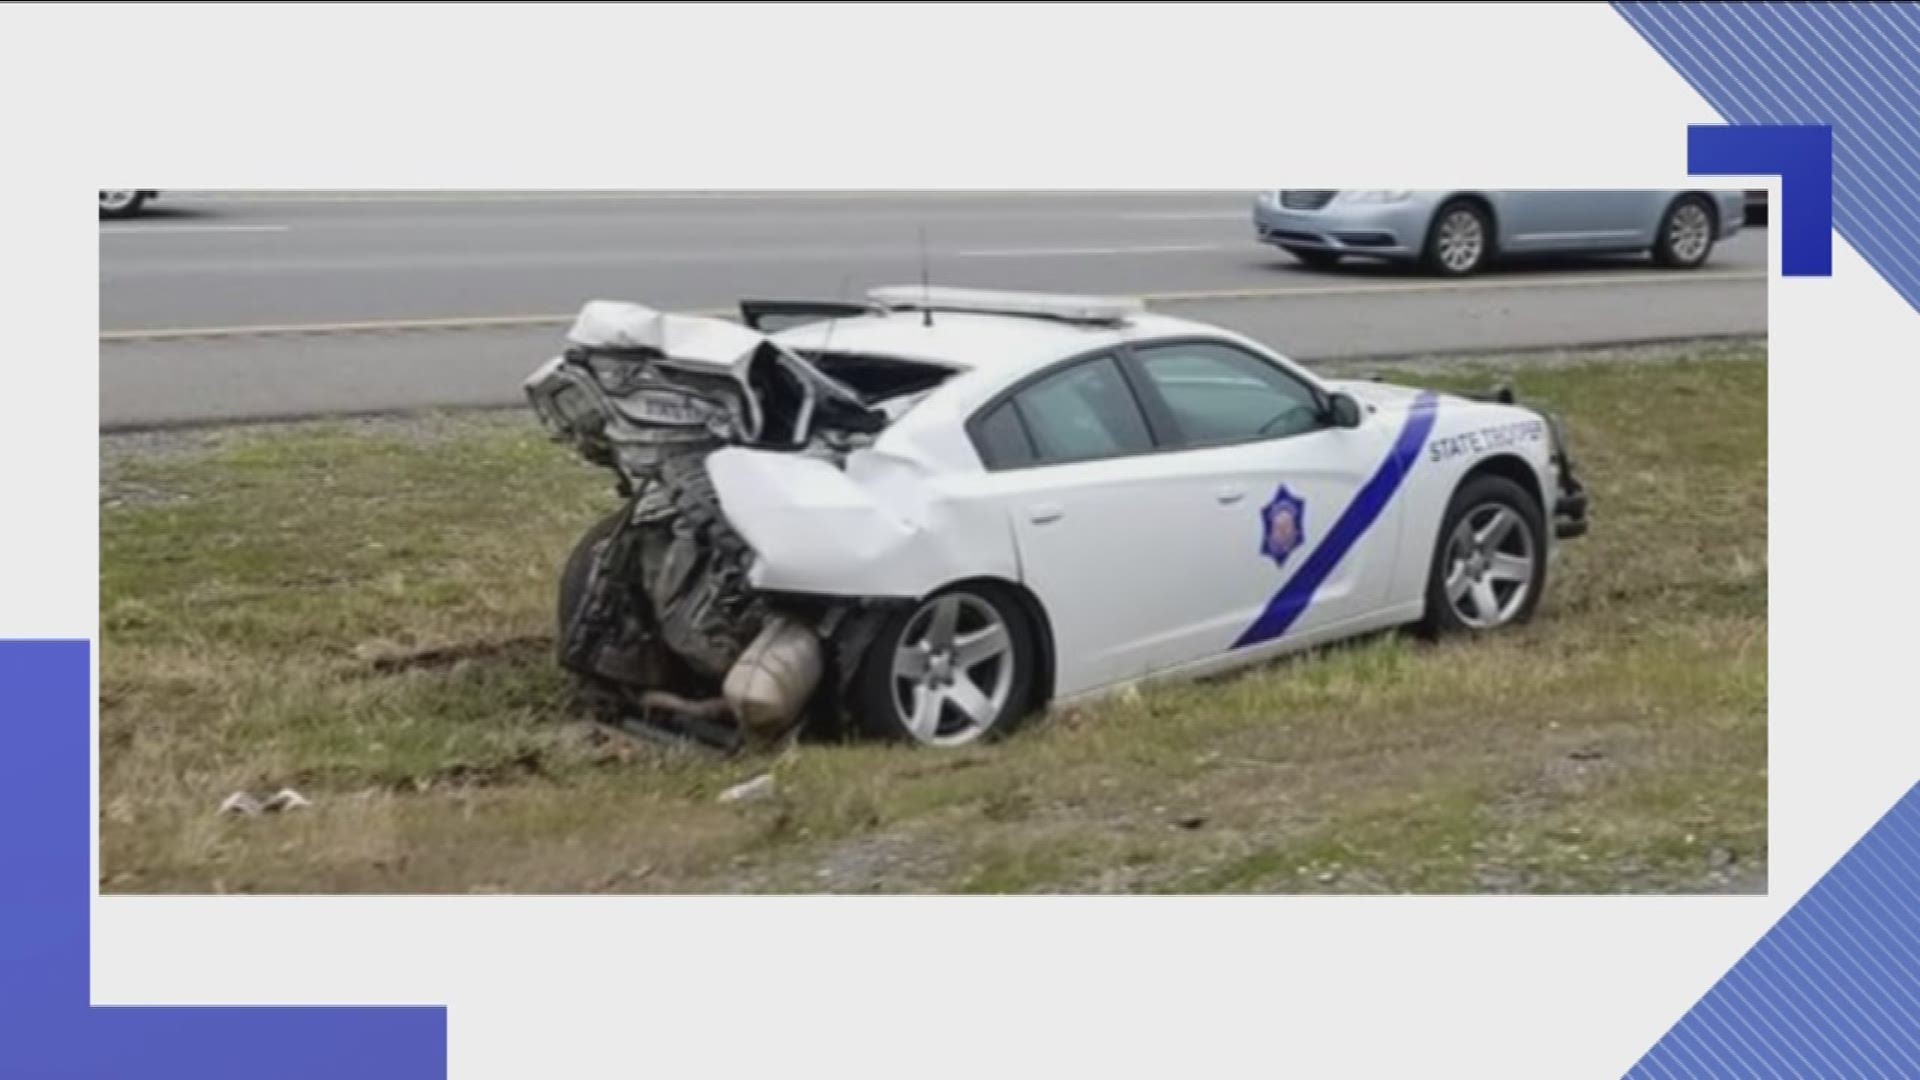 An Arkansas State Trooper is recovering tonight after he was rear-ended earlier in the day on I-40 near Mayflower.